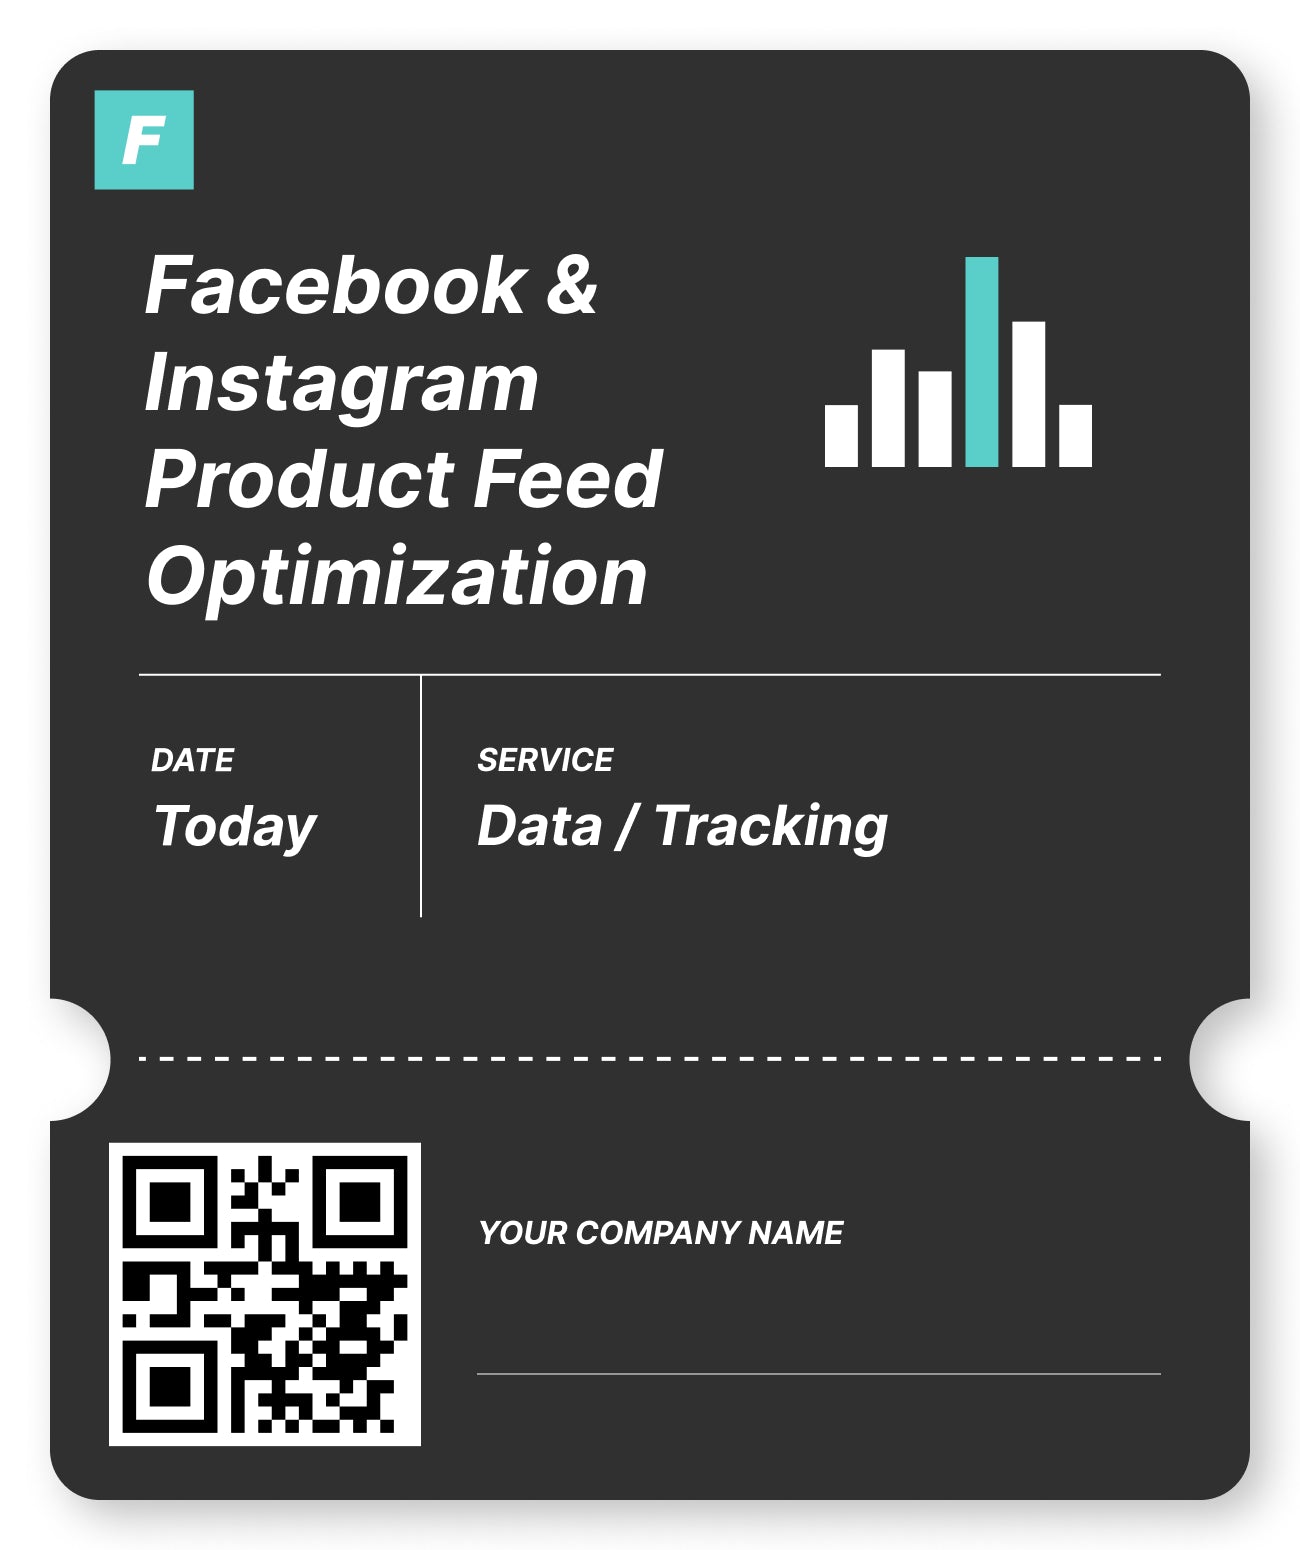 Facebook & Instagram Product Feed Optimization